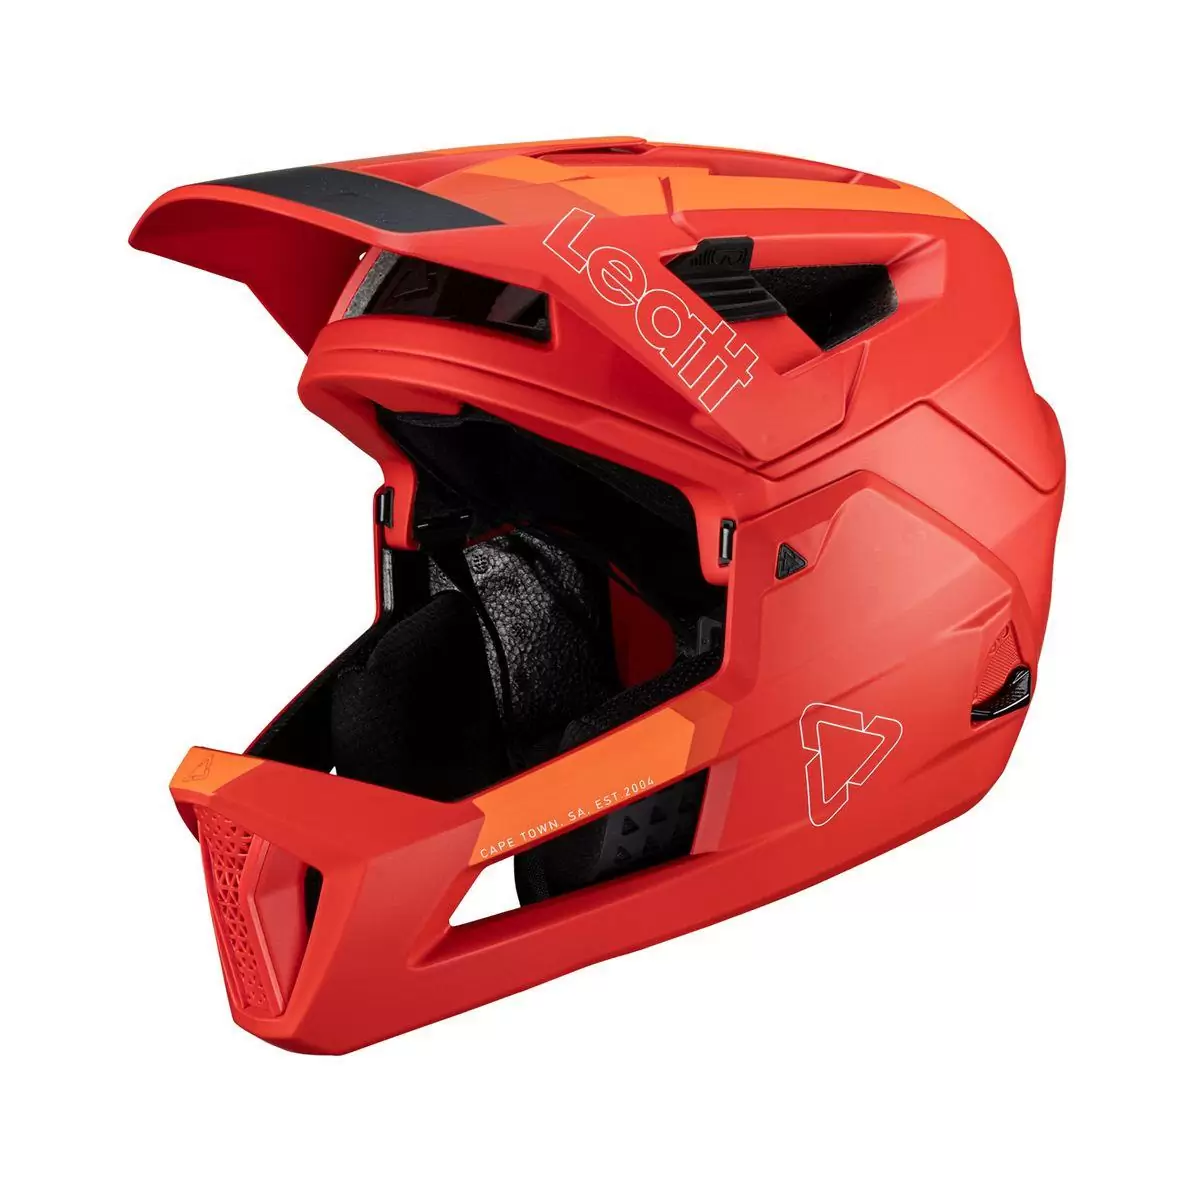 Leatt 1024120271 mtb enduro 40 helmet with removable chin guard red s